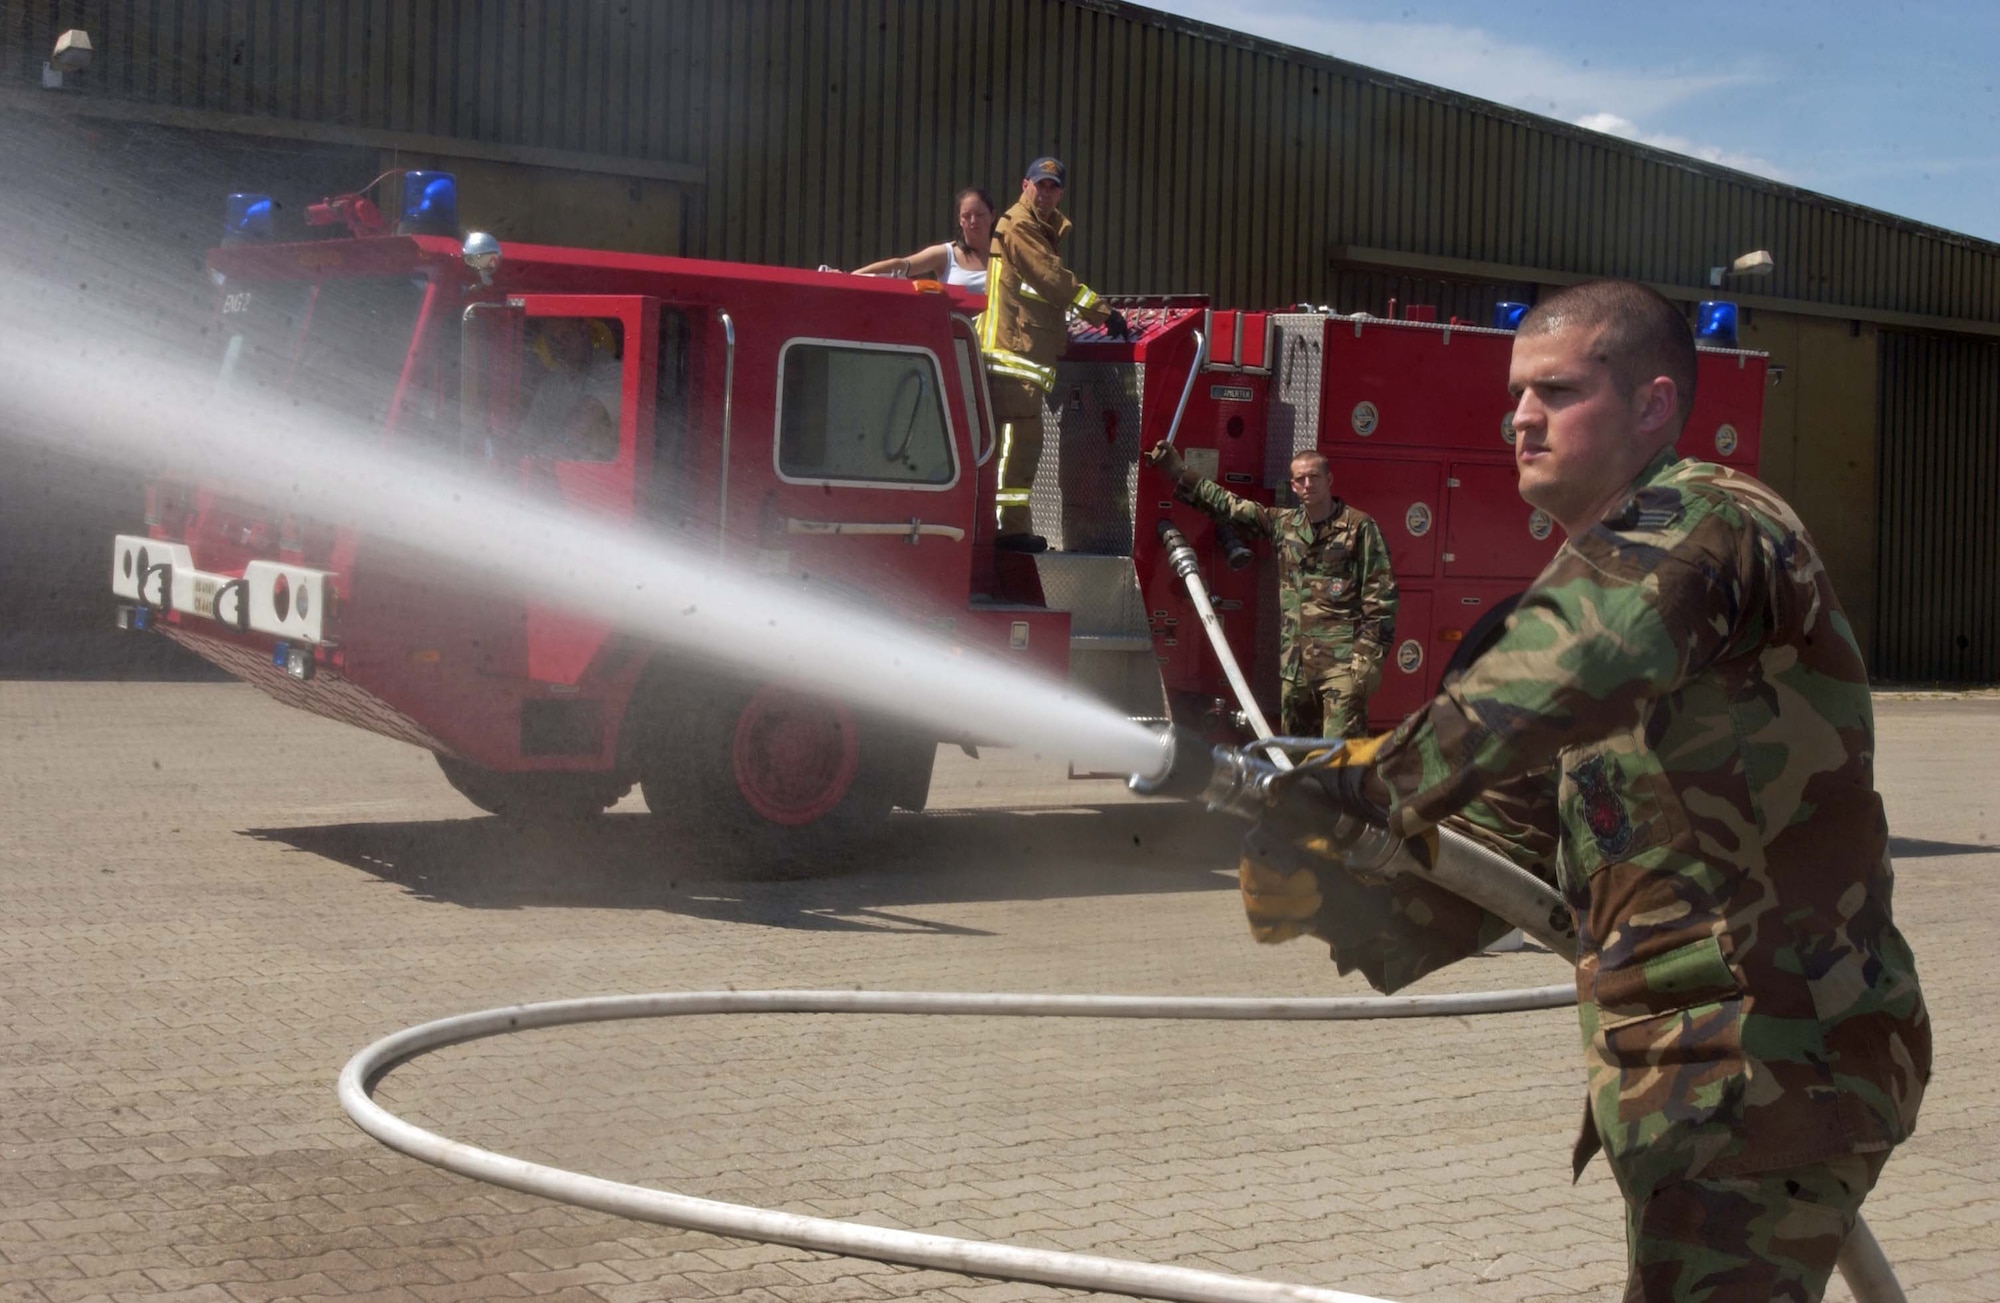 Airman 1st Class Taylor Hydrick, a firefighter with the 835th Civil Engineer Squadron, discharges the water from a fire hose of an AMERTEK Fire Truck July 10 on Rhine Ordnance Barracks. Photo by Christine June, USAG Kaiserslautern.                                          